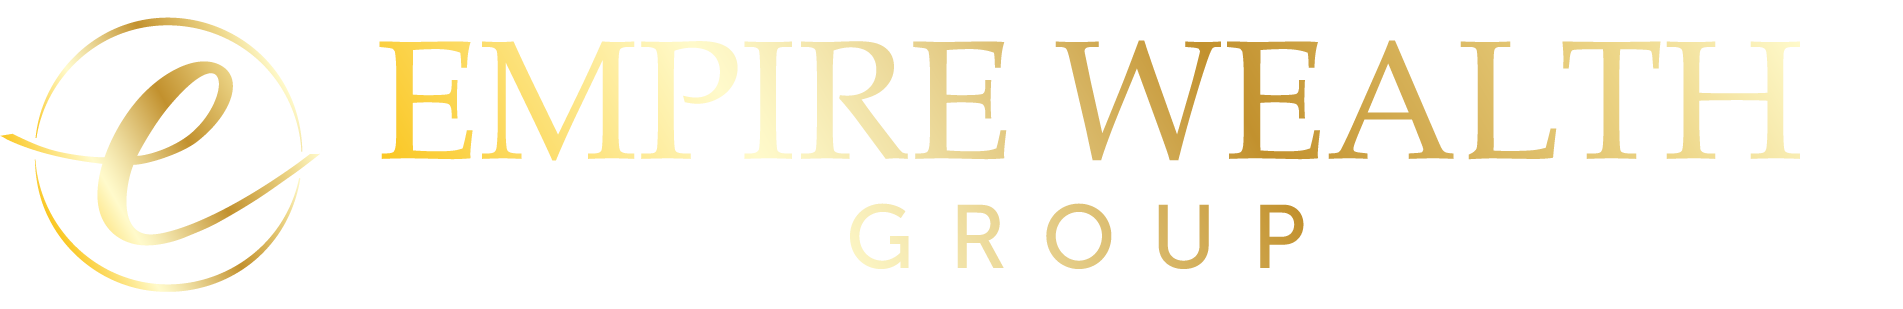 Empire Wealth Group